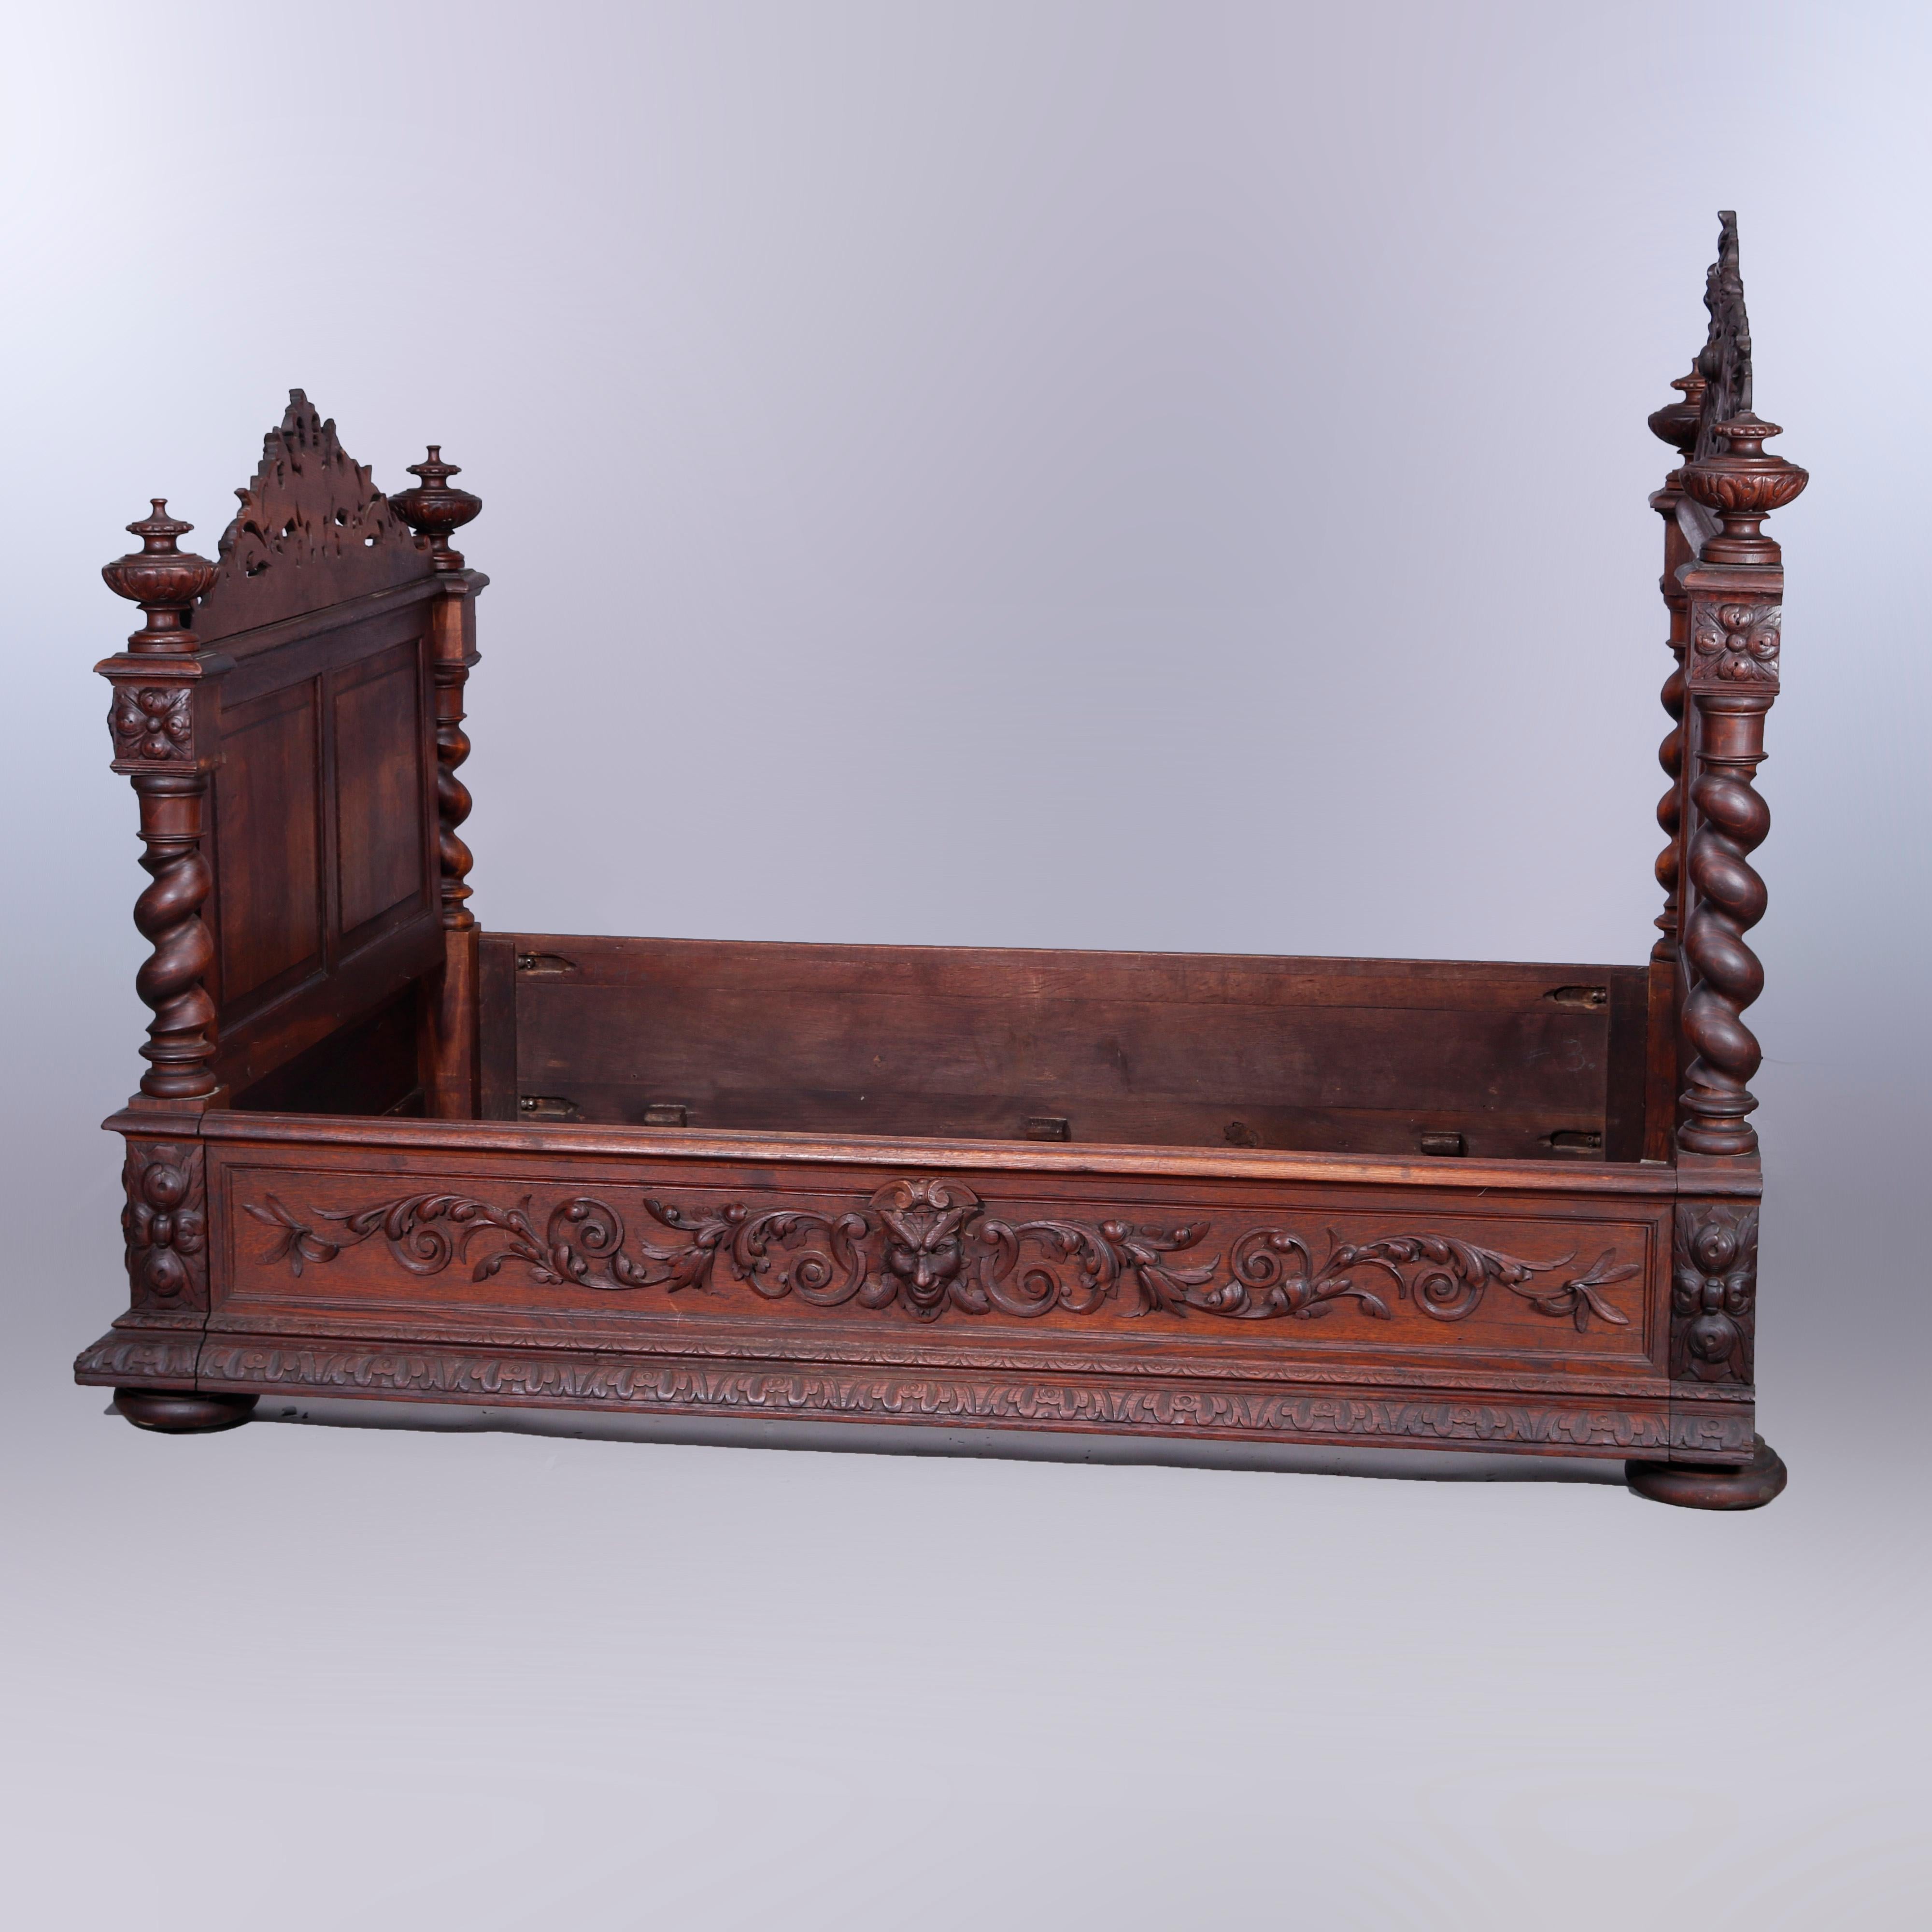 English Antique Elizabethan Figural Carved Oak Double Bed Frame with Griffons, c1850